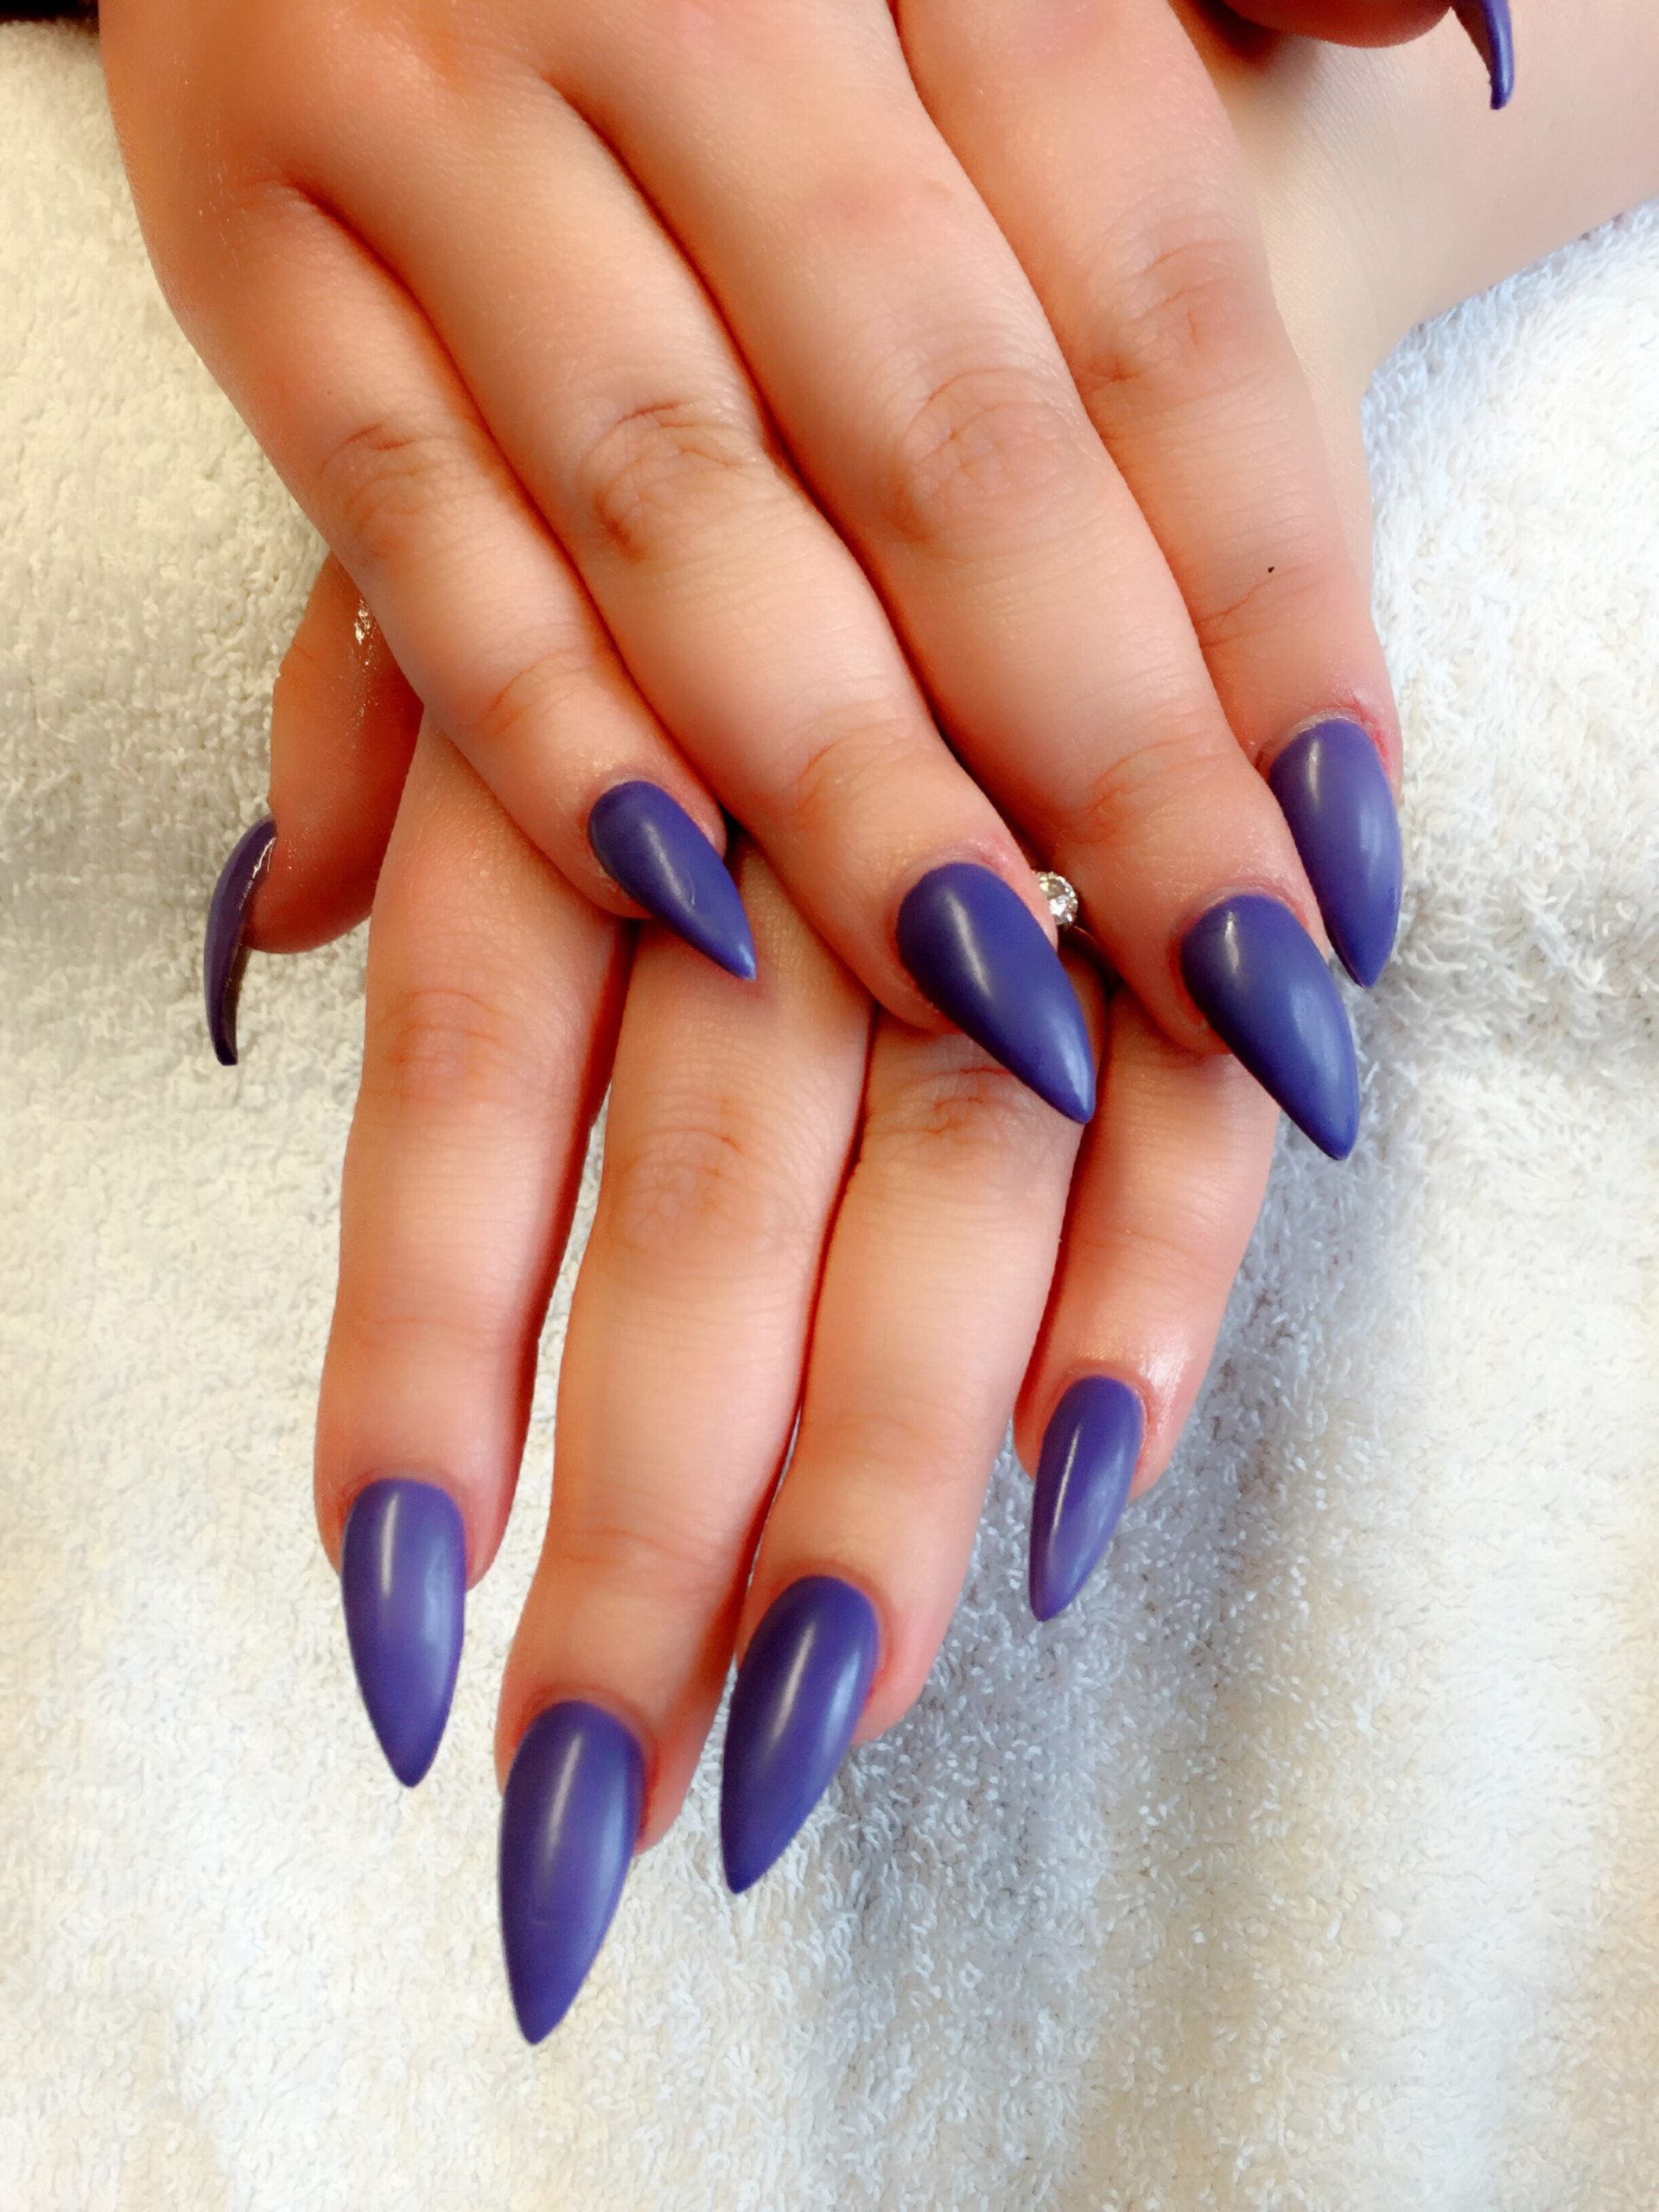 Very Pointy Shape | Chic Nails